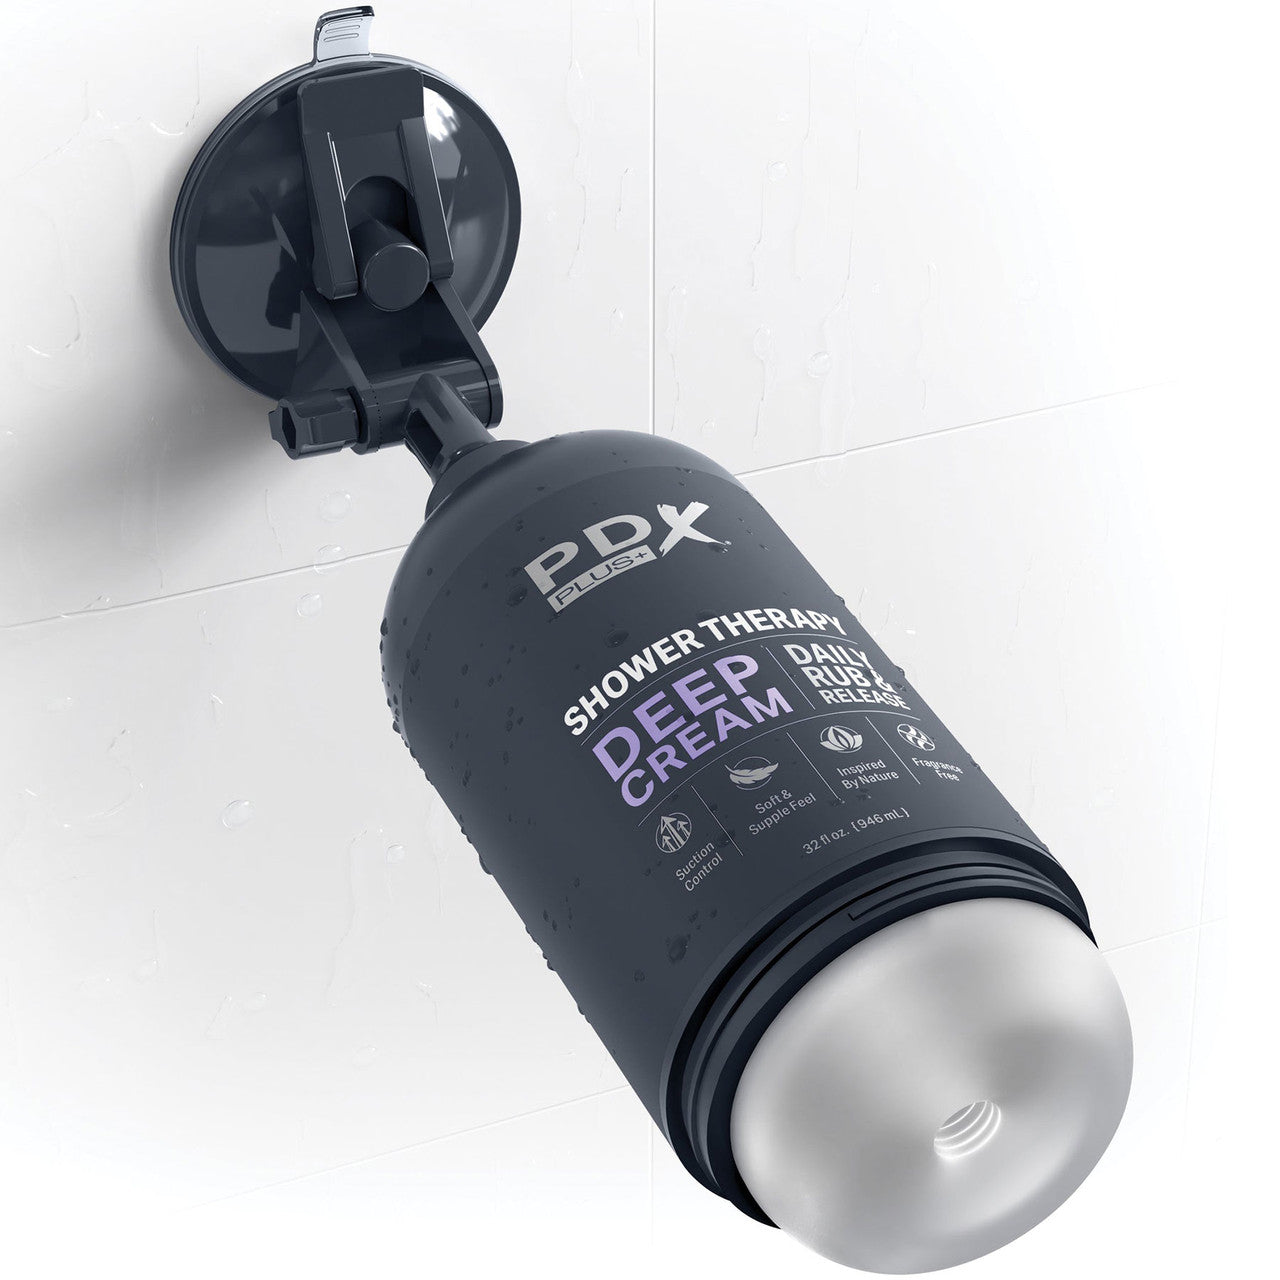 Attach the Discreet Stroker to any wall with tiles or made of glass